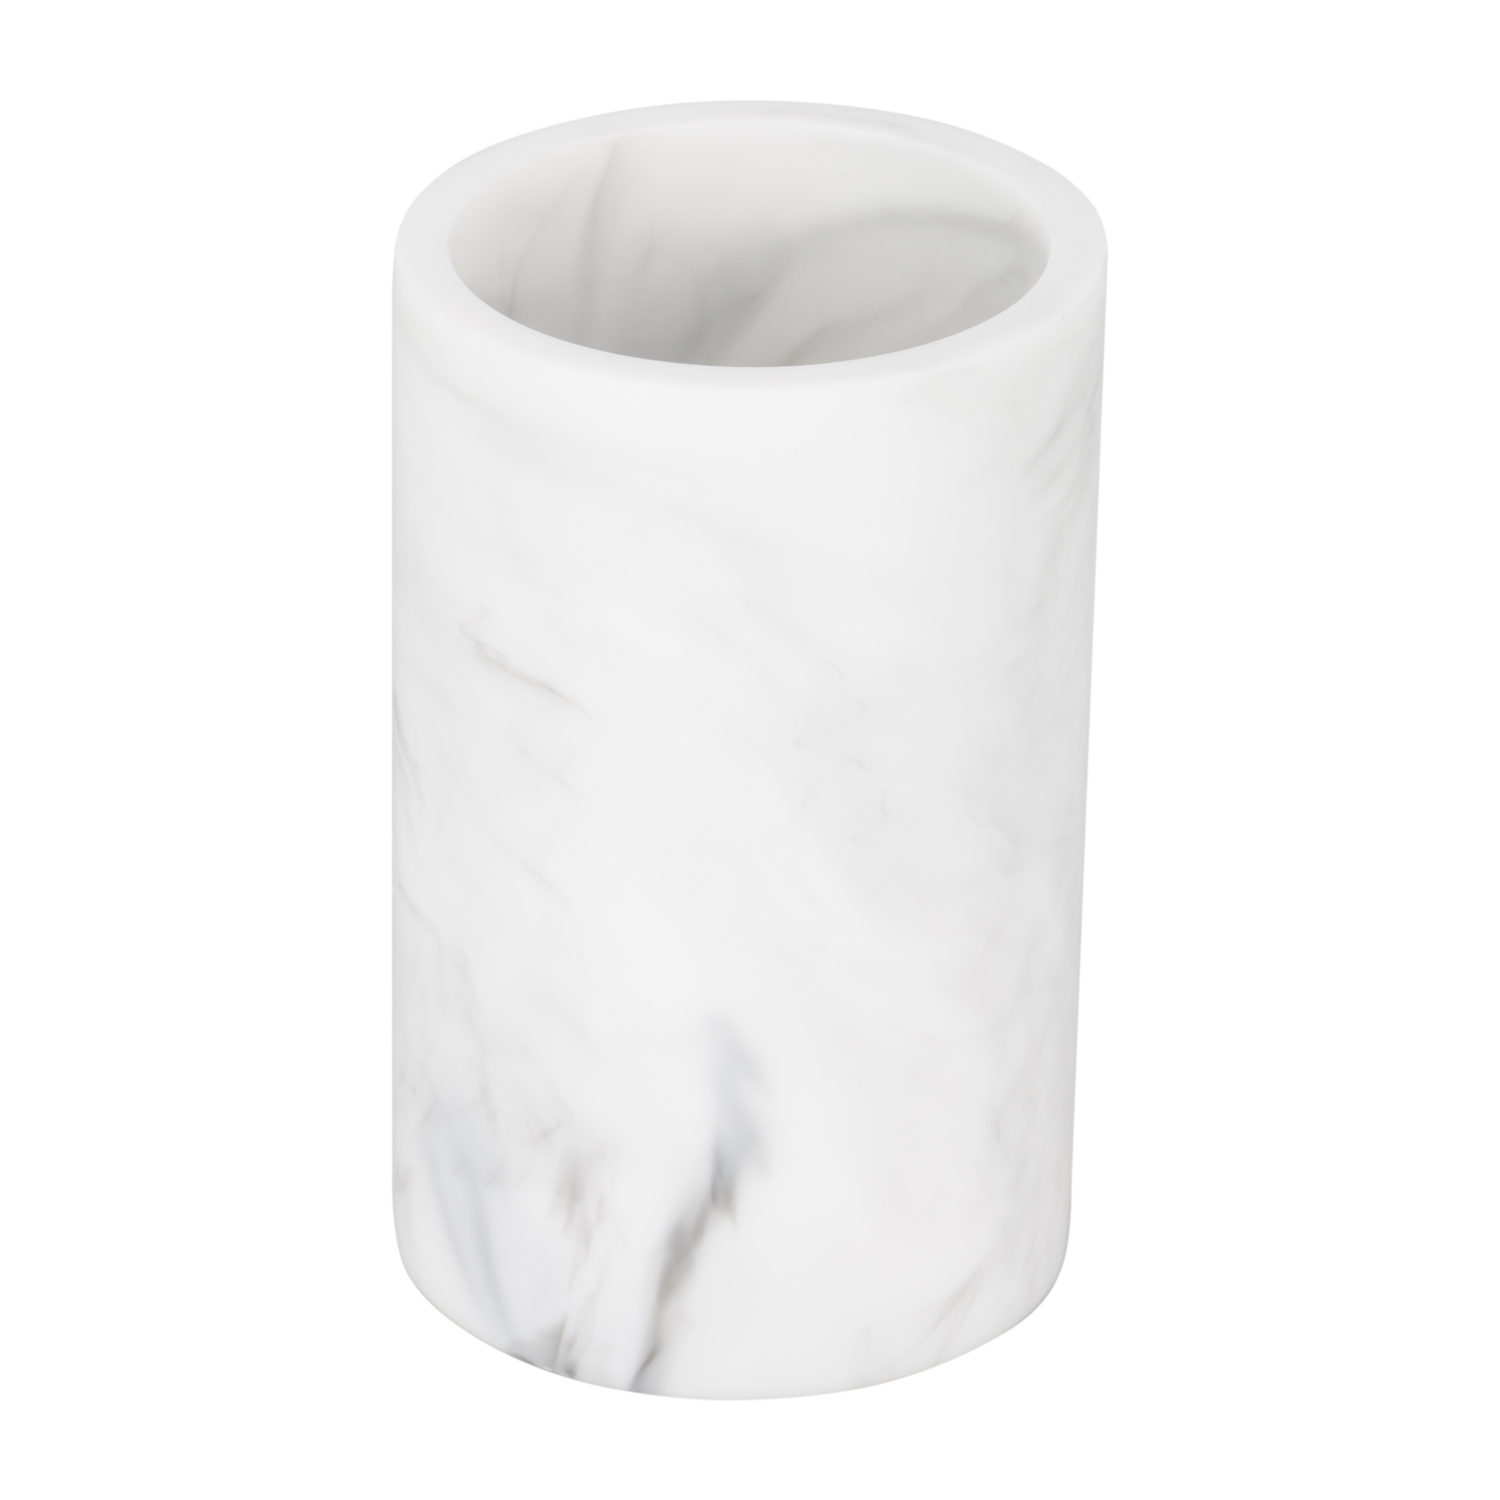 Attica White Marble Effect Toothbrush Holder Image